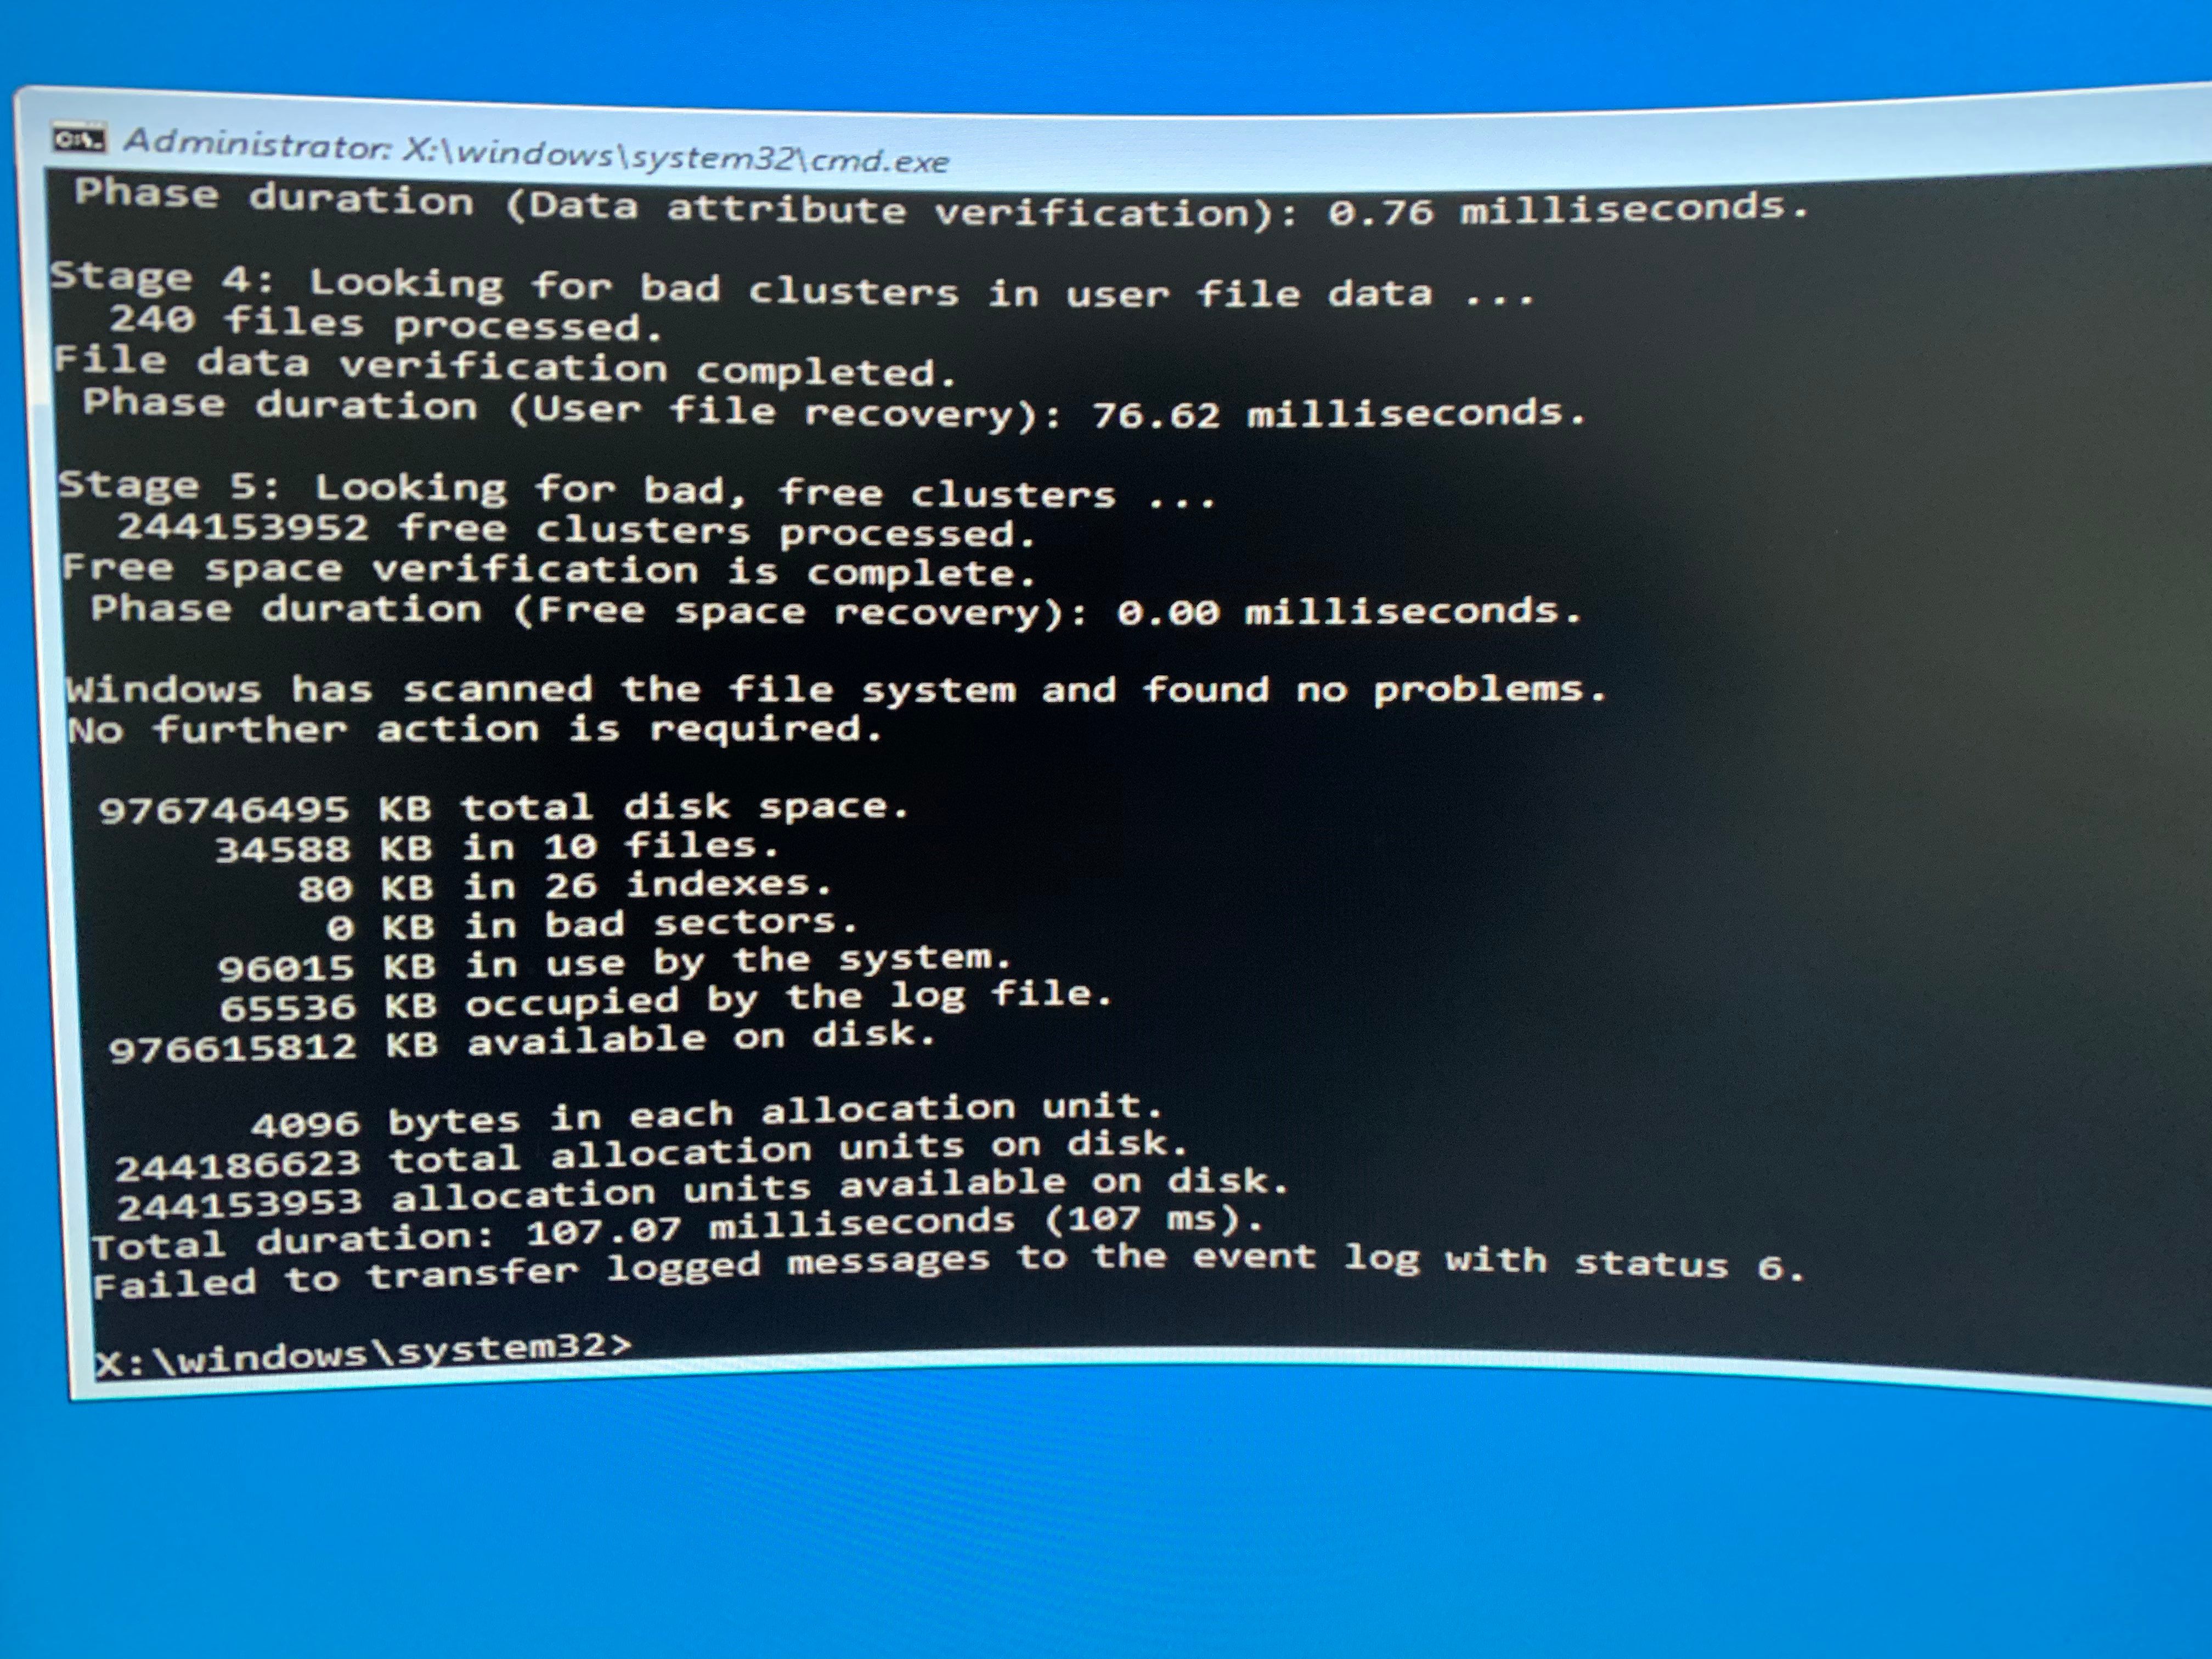 chkdsk scanning and repairing every time i turn on my - Microsoft Community